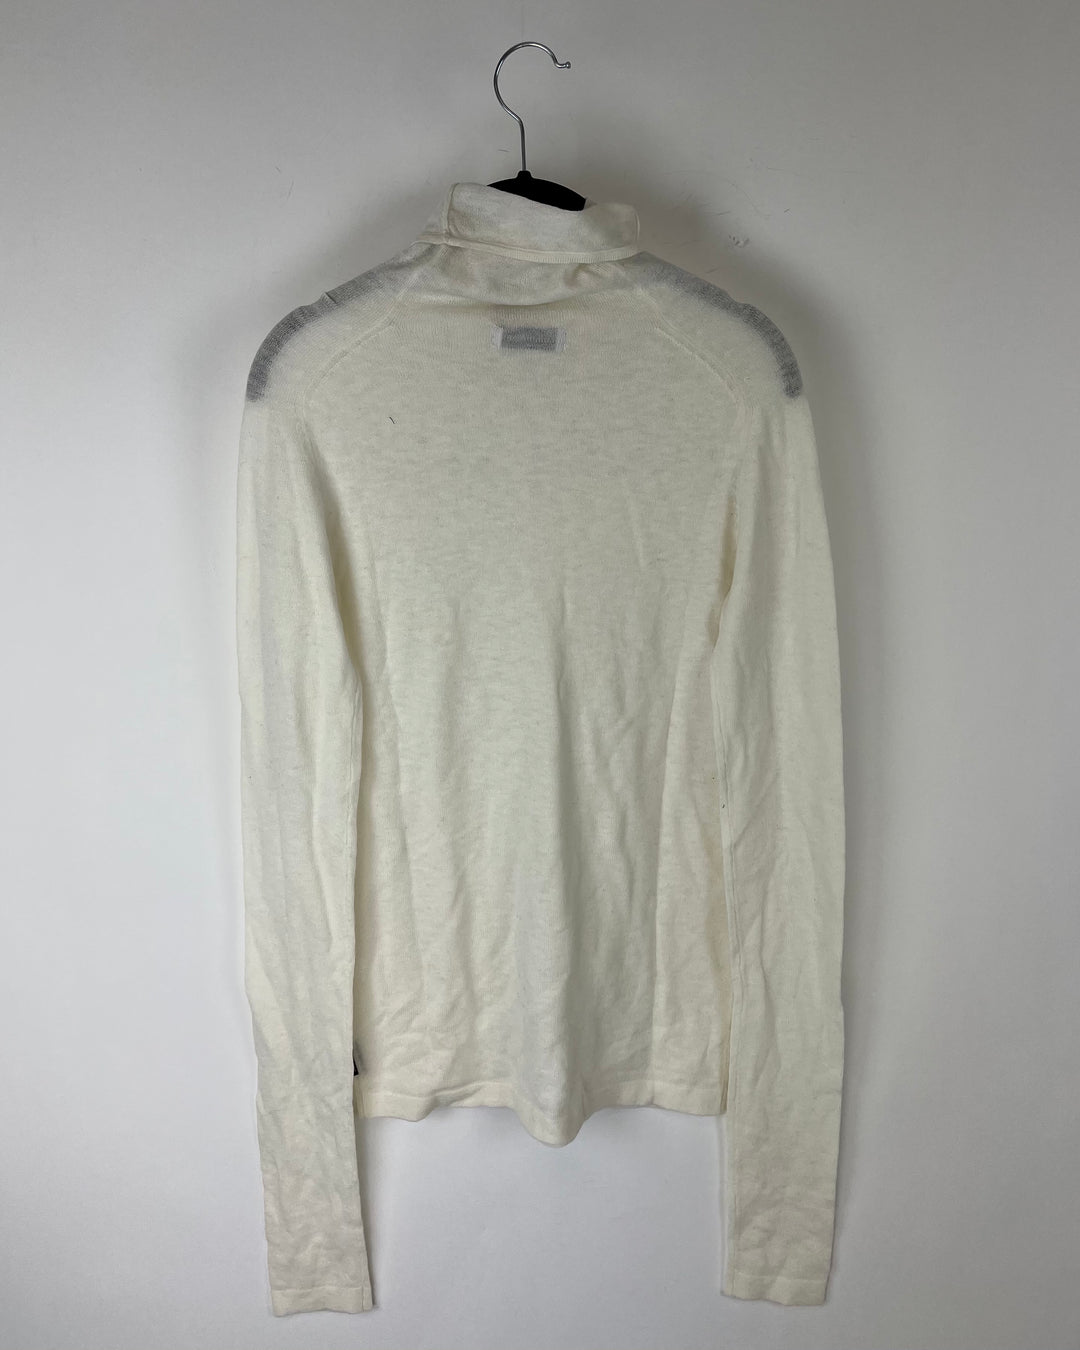 White Long Sleeve Turtle Neck Top - Small